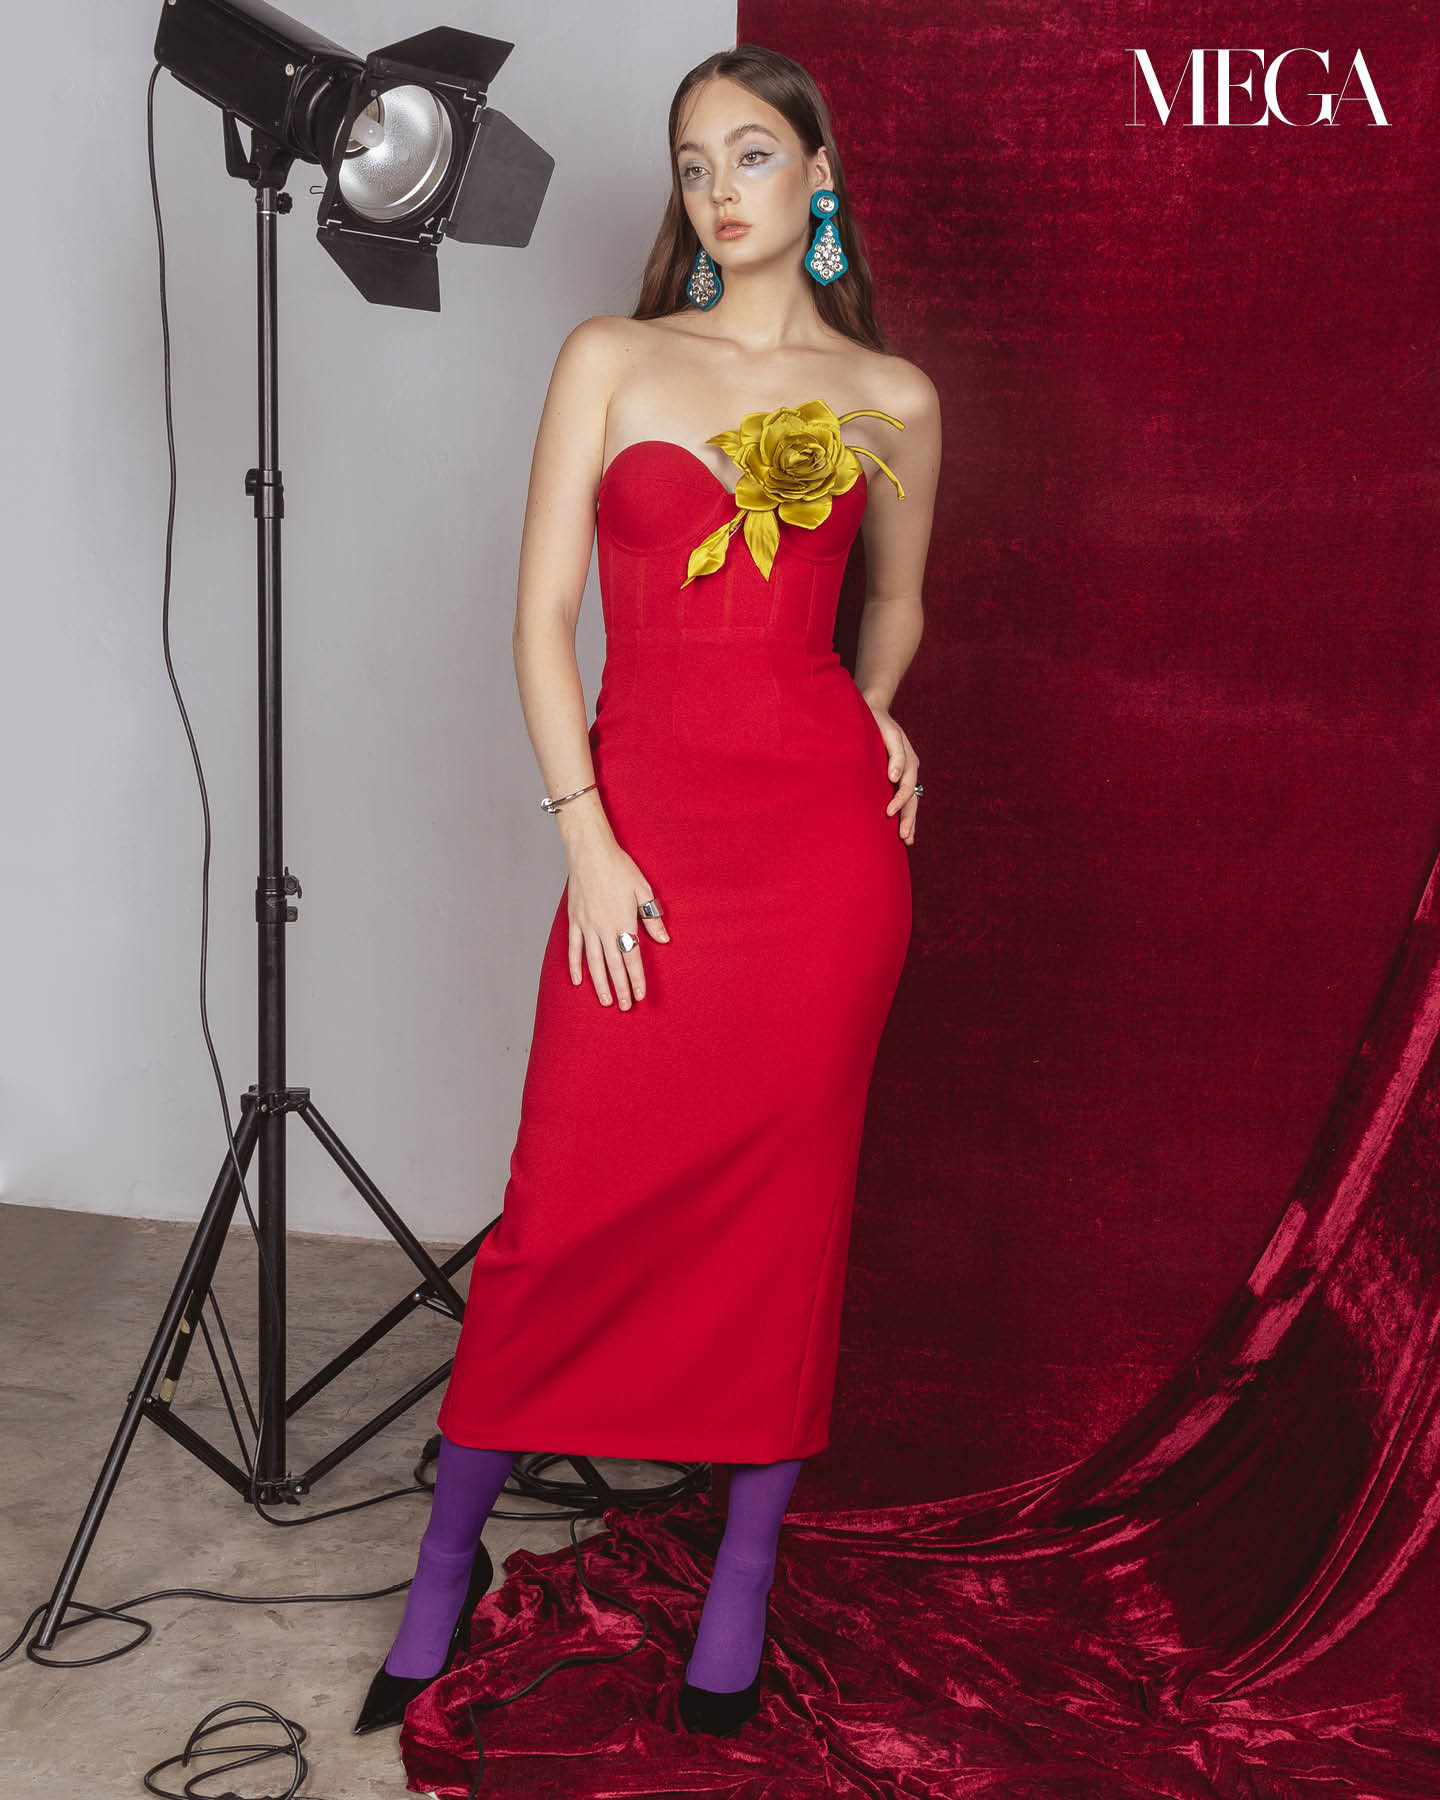 Chris Diaz's Holiday Collection Turns Gatherings Into Parties